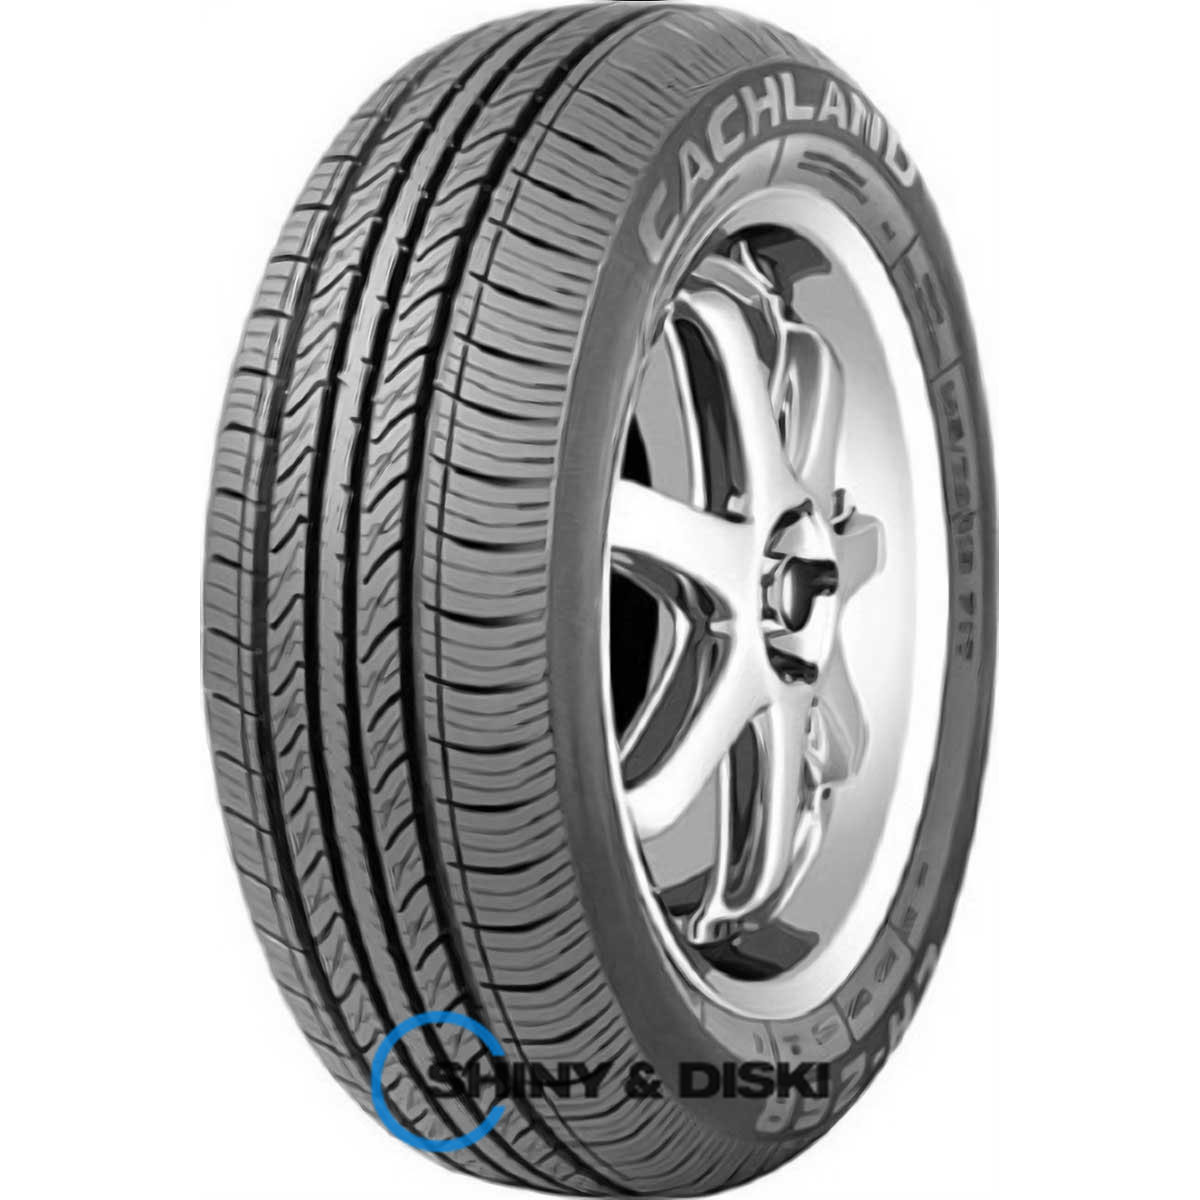 cachland ch-268 175/70 r13 82t